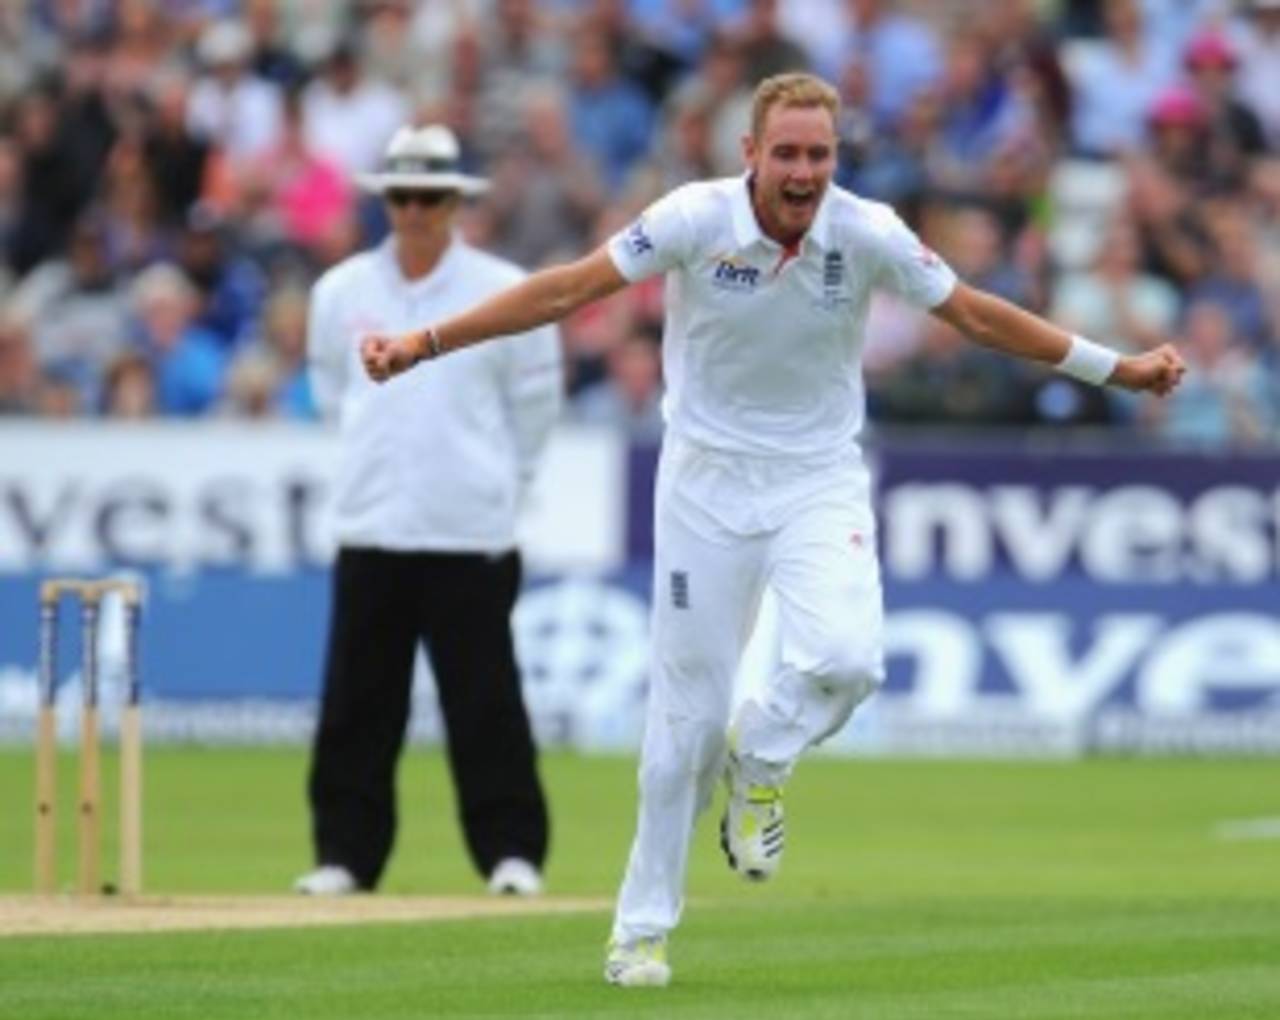 Stuart Broad celebrates after David Warner's wicket, England v Australia, 4th Investec Ashes Test, 2nd day, Chester-le-Street, August 10, 2013